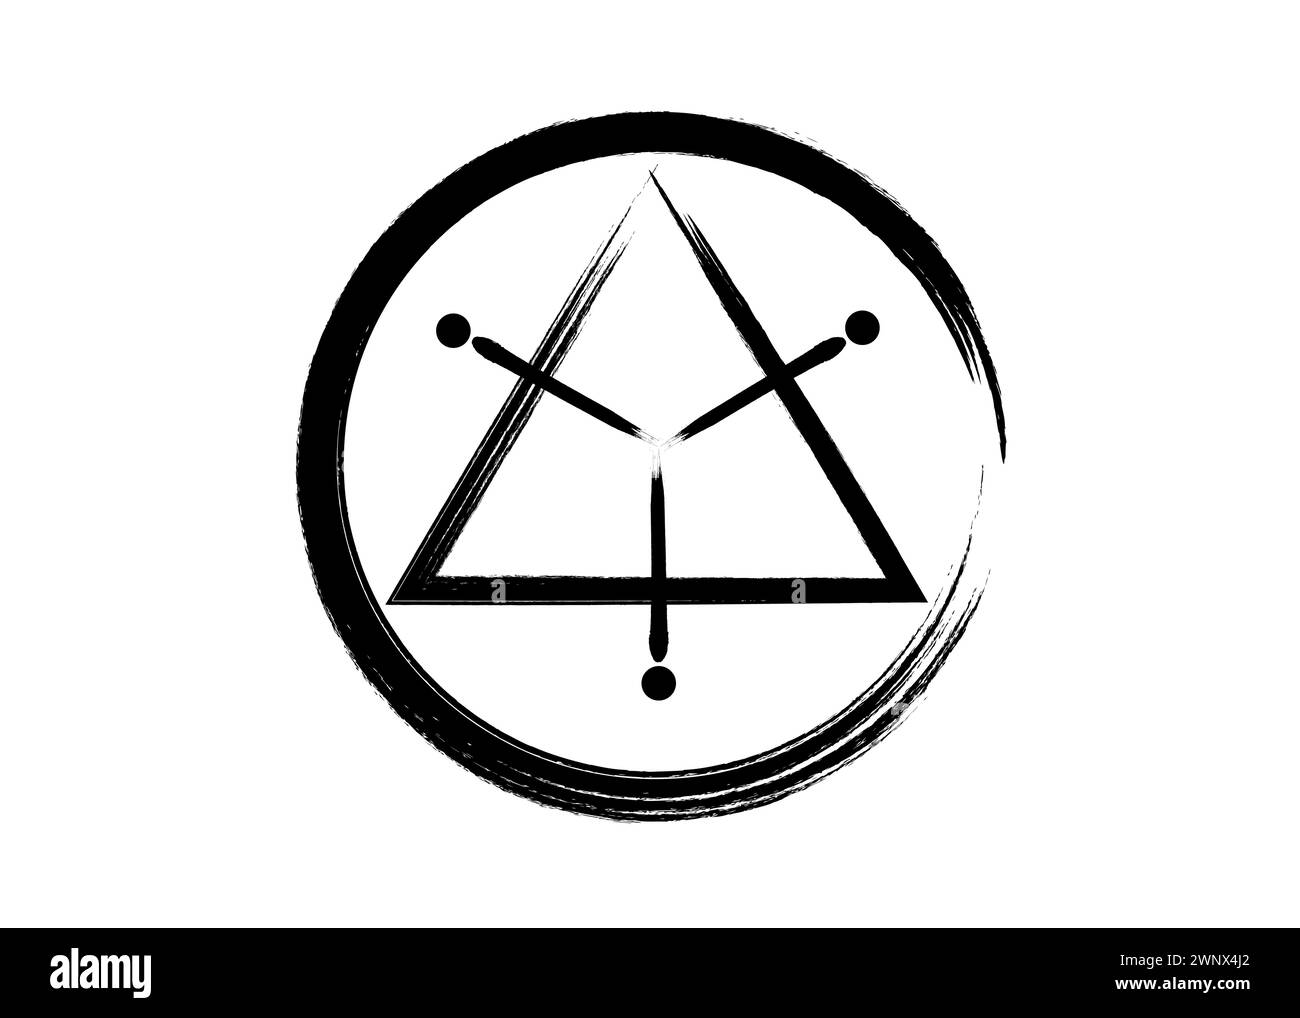 sacred geometrical figure of a circle inscribed in a triangle, the vector logo tattoo mythological symbol round triangle, grunge paint brush style Stock Vector